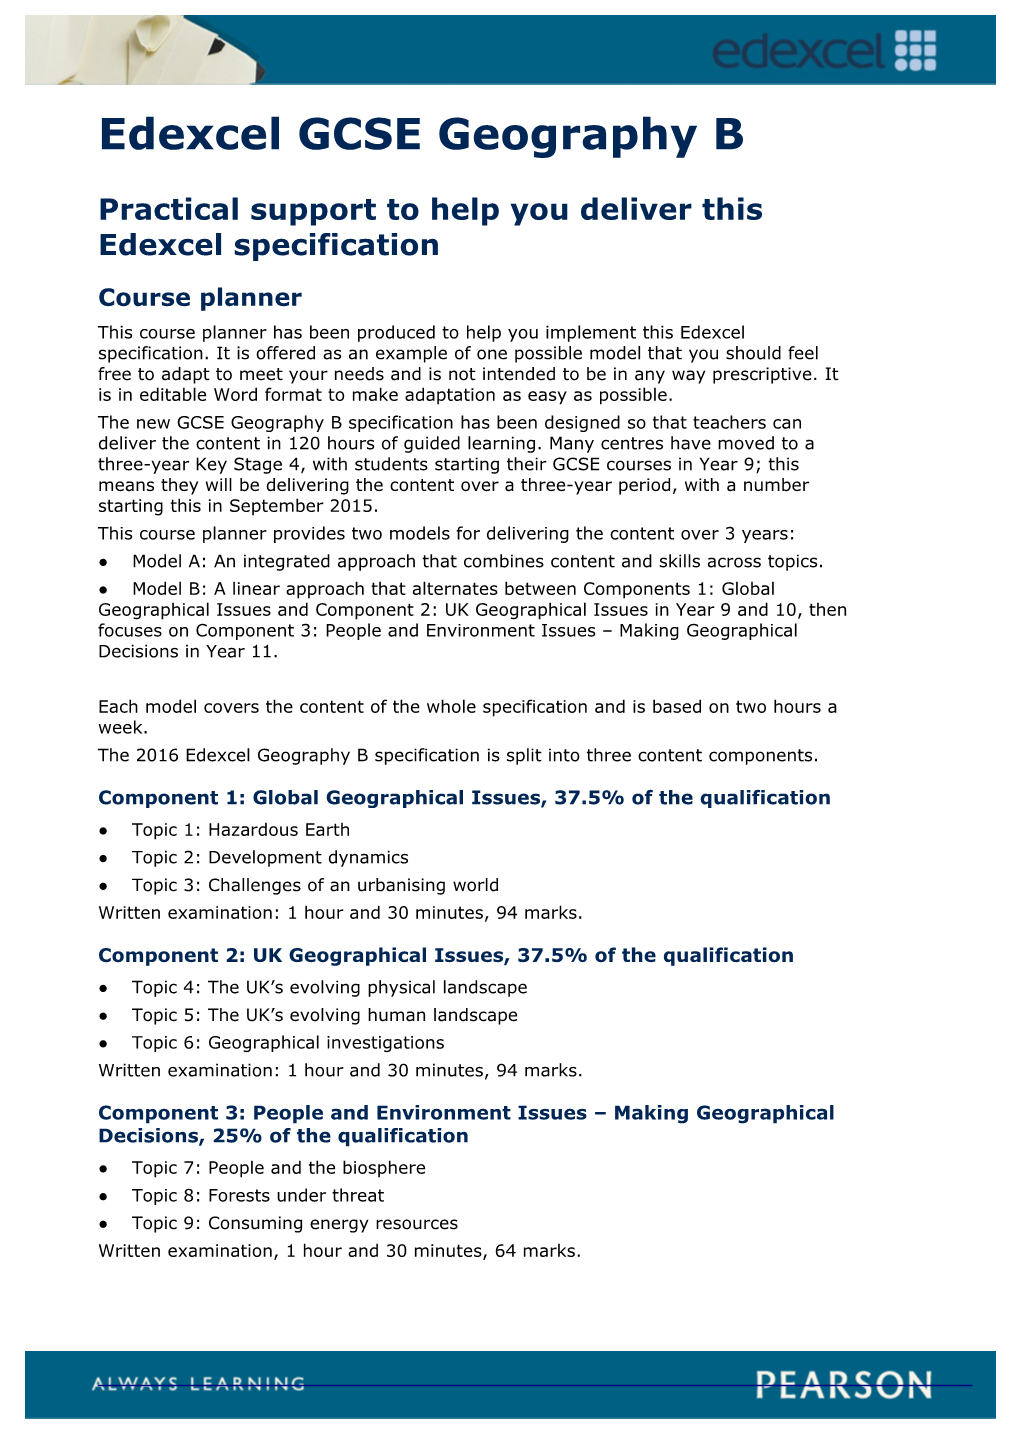 Practical Support to Help You Deliver This Edexcel Specification